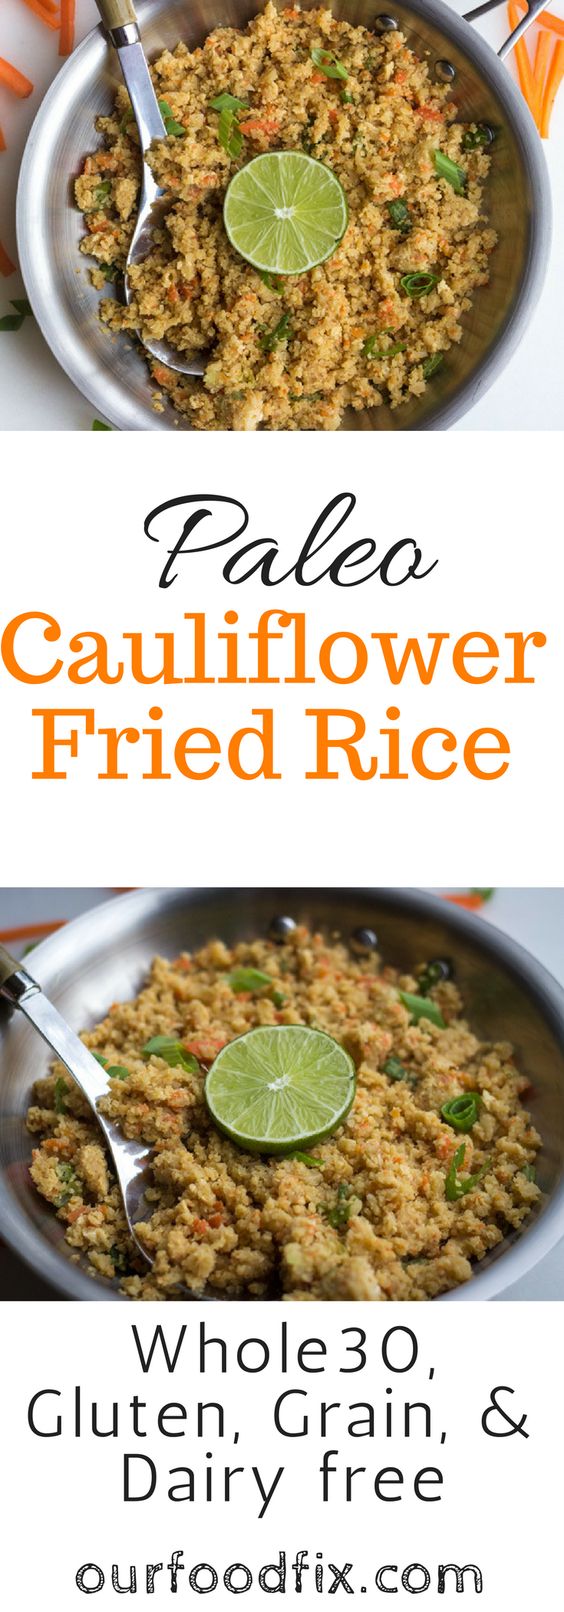 Cauliflower fried rice | Paleo recipes | gluten free recipes | grain free recipes | dairy free recipes | Whole30 recipes | healthy dinner | recipe makeover | vegetarian recipes | one pot meal | leftovers 